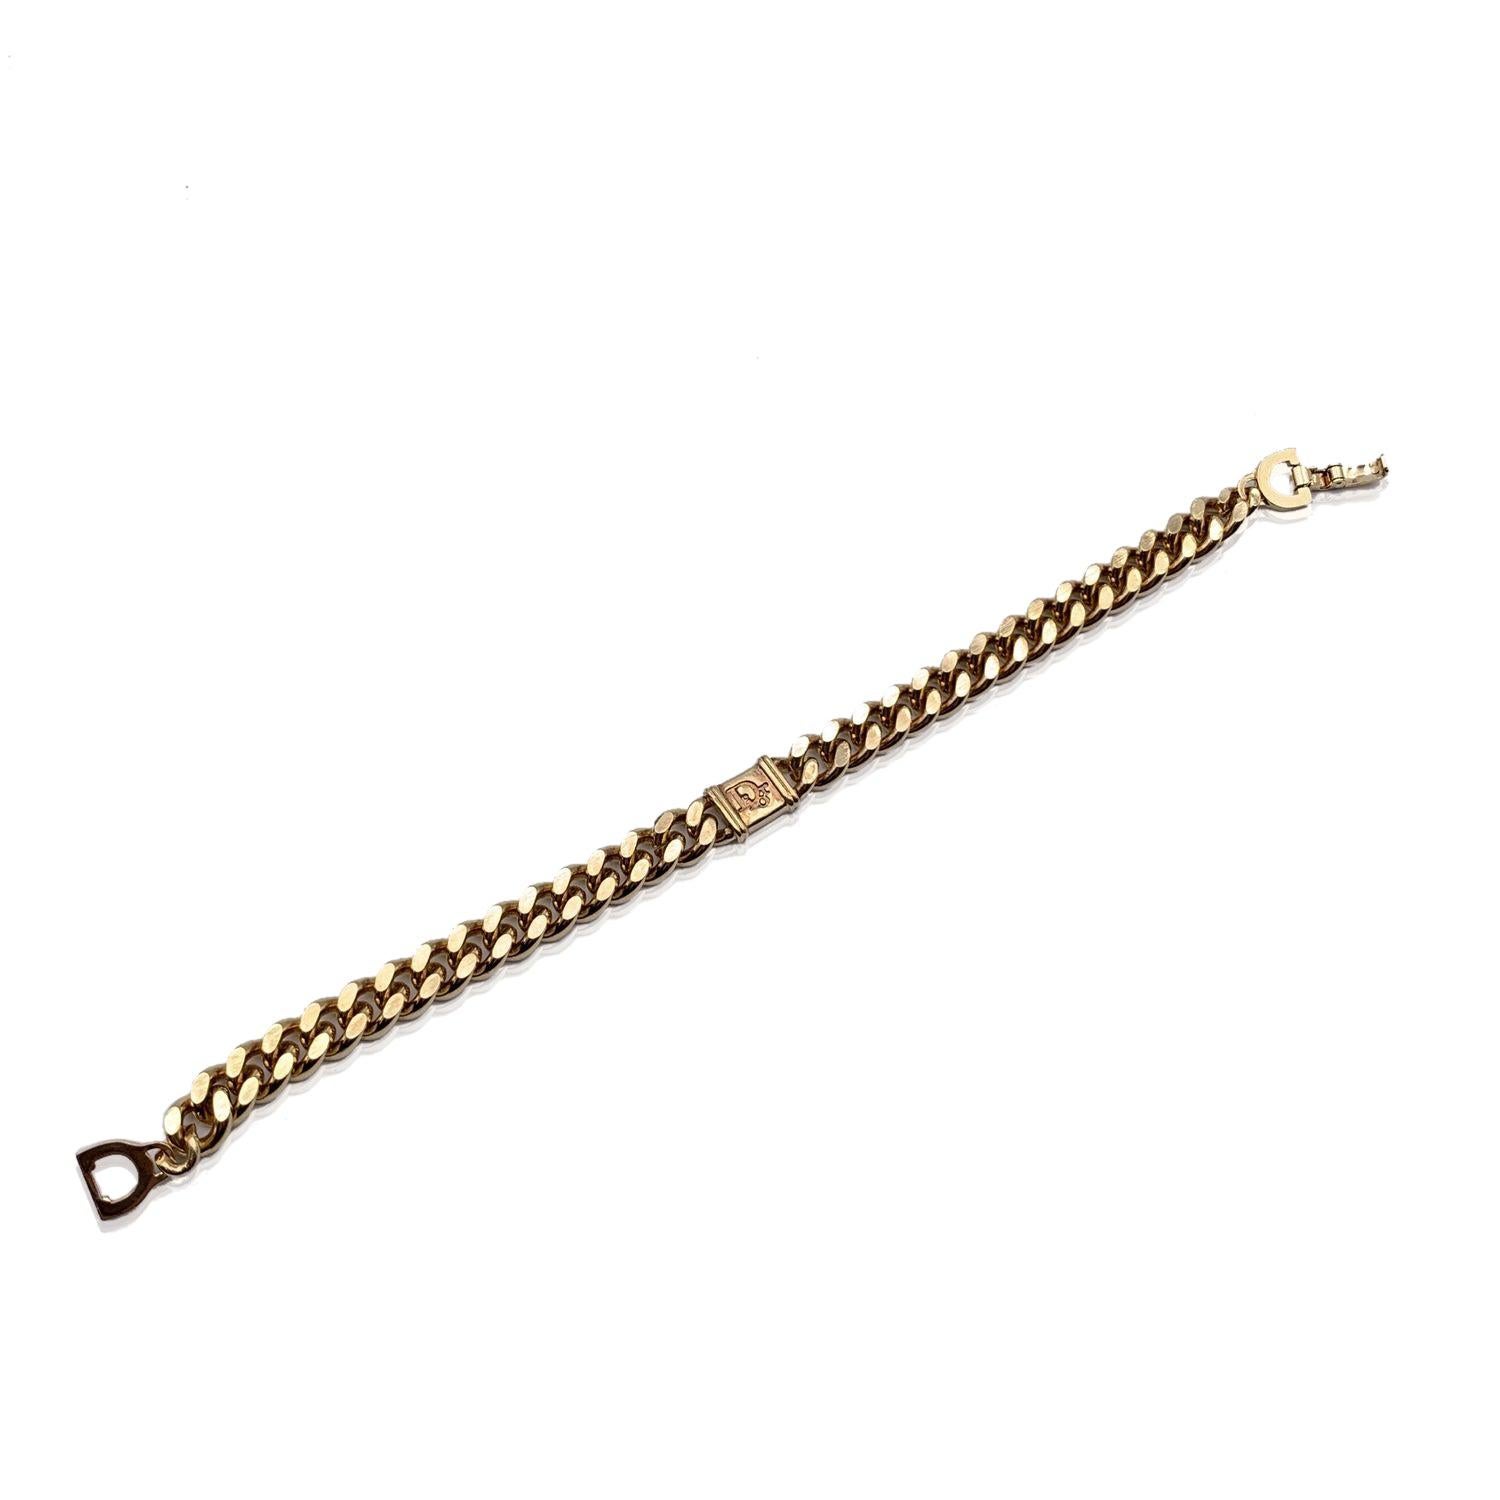 Vintage gold metal chain bracelet by CHRISTIAN DIOR. Dior logo center piece in the center. Clasp closure. Total length: 7 inches - 17.8 cm. 'Chr. Dior' engraved on the closure. Made in Germany Condition A - EXCELLENT Gently used. Please check